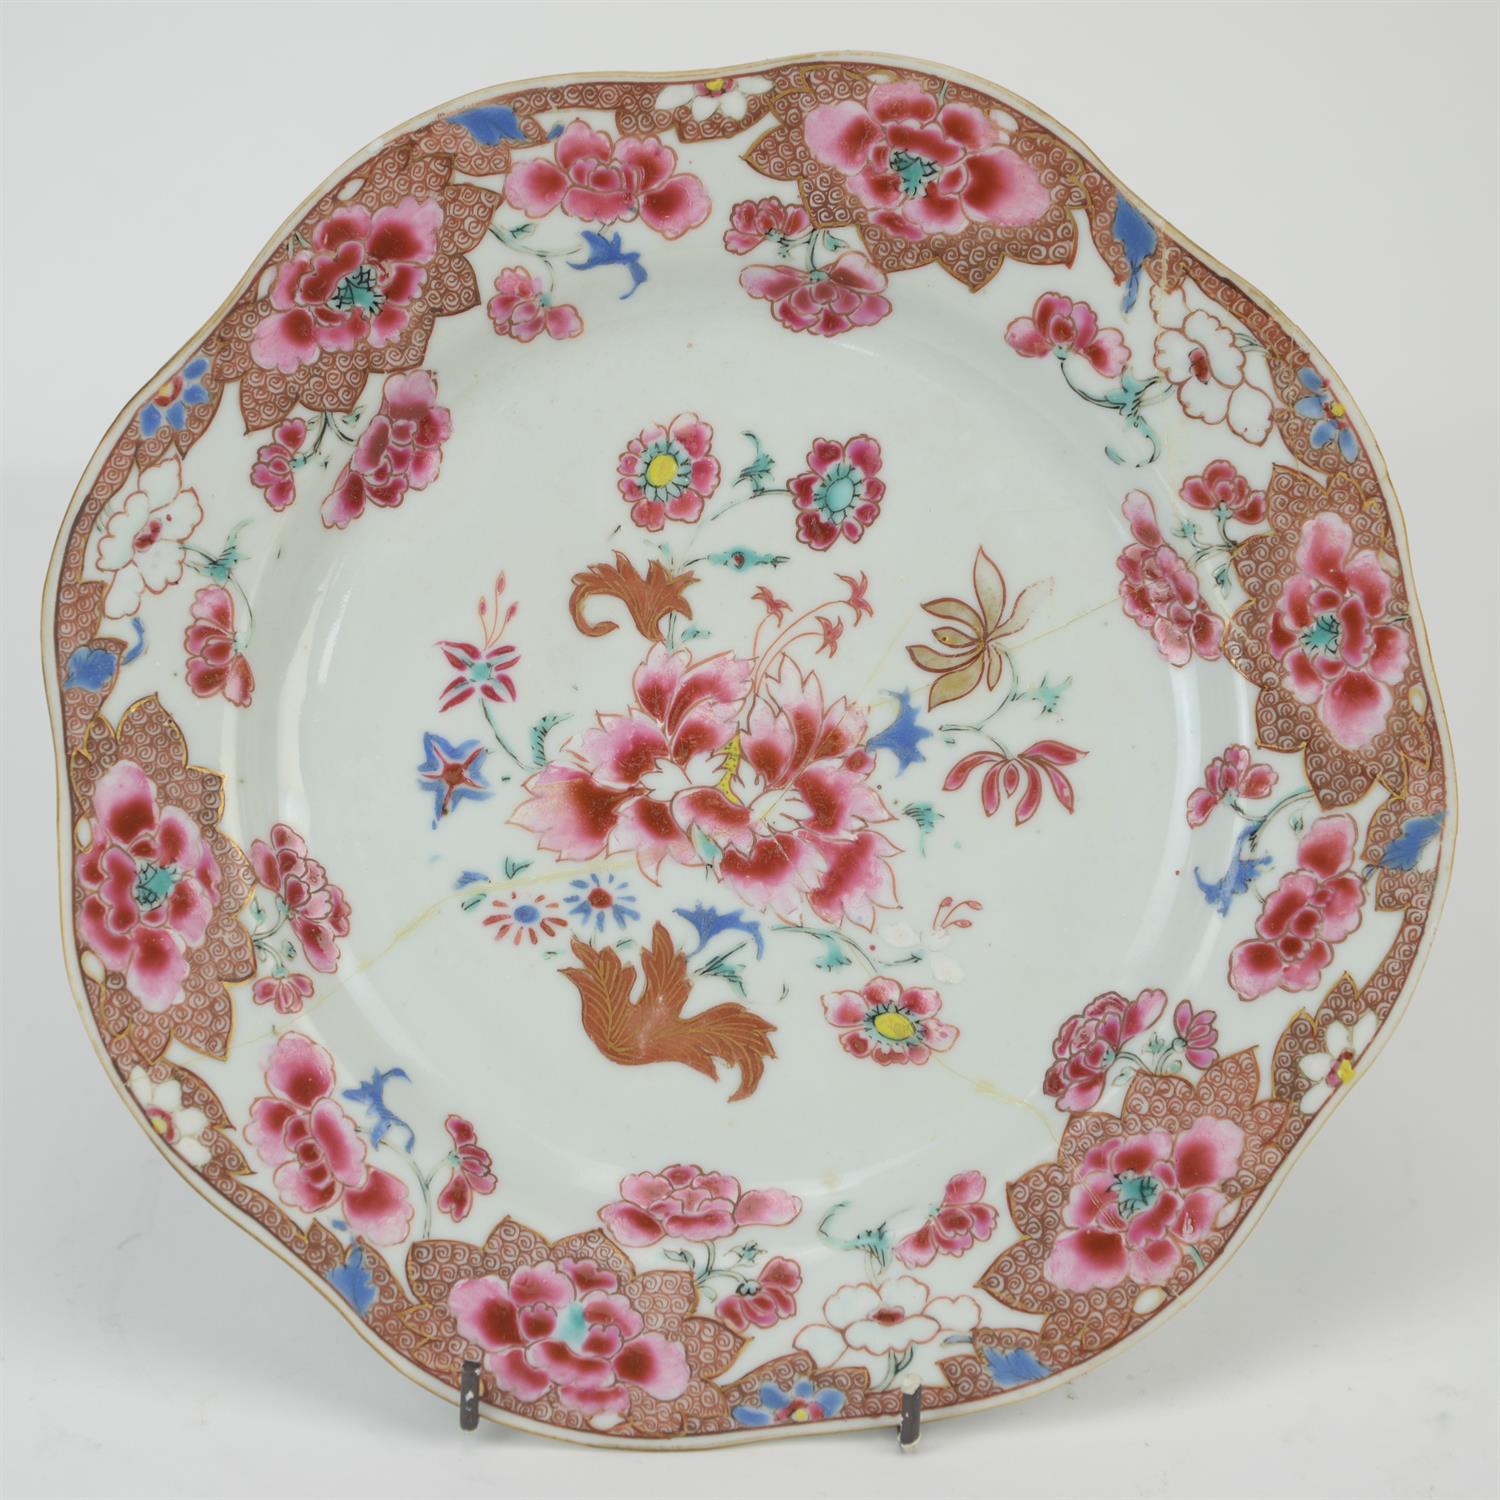 Eight famille rose dishes; each one decorated with floral designs and about 22.5 cm diameter, - Image 7 of 28